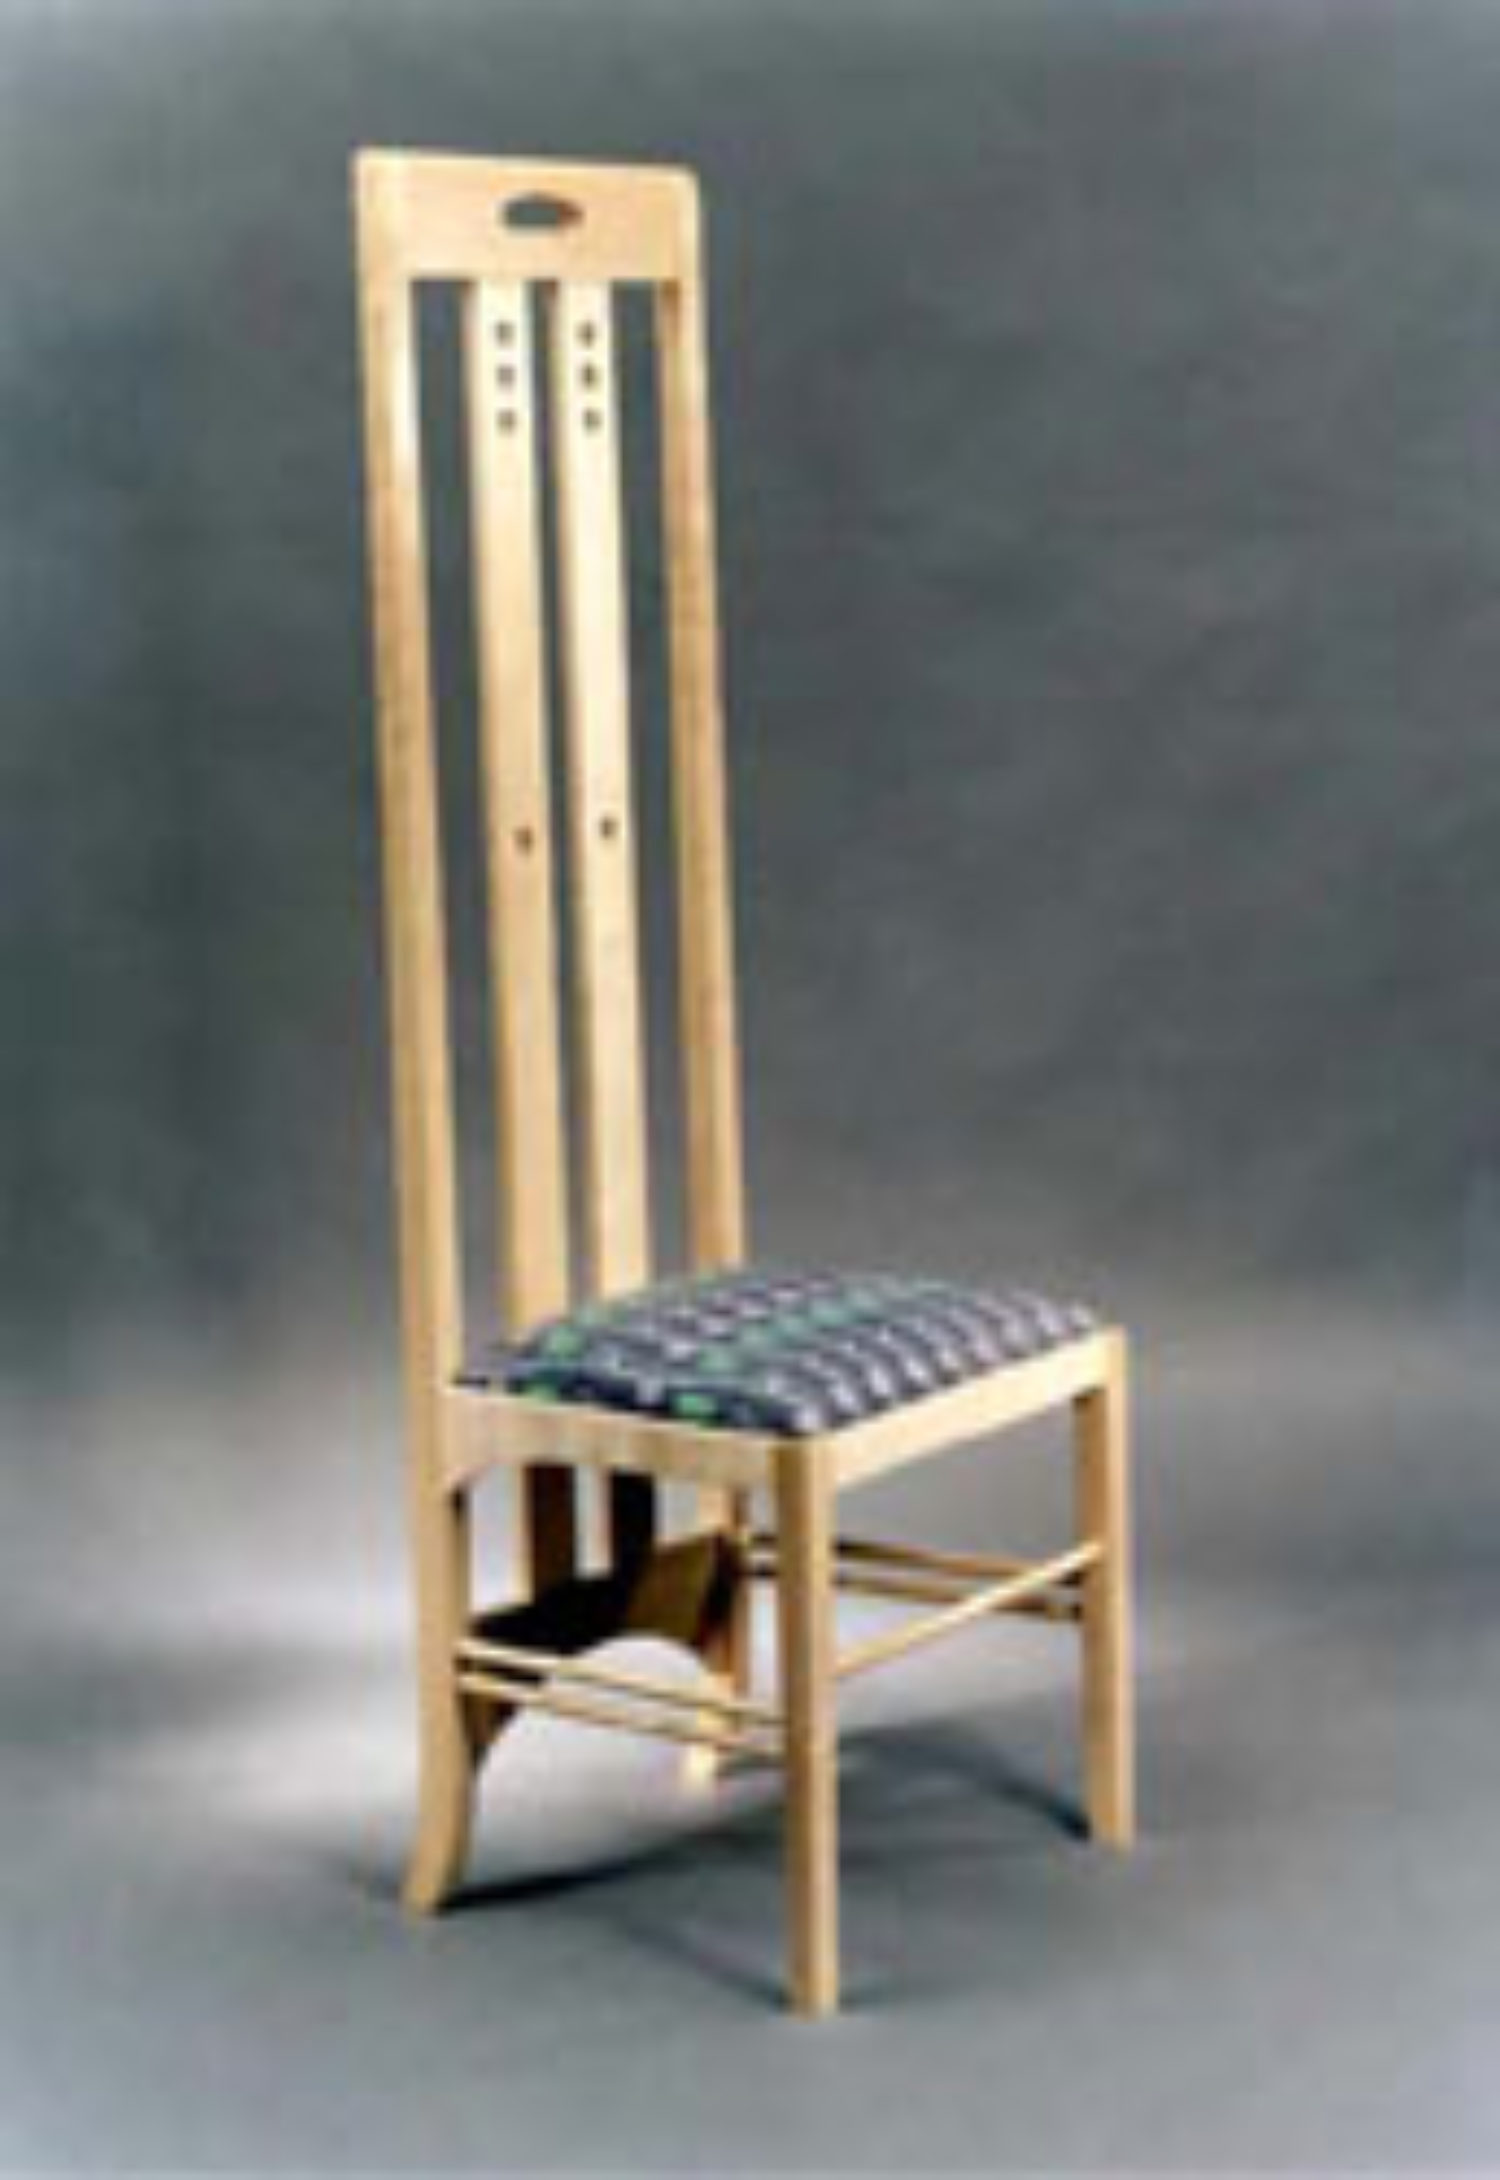 Mackintosh Style in Sycamore with Mackintosh Inspired Fabric